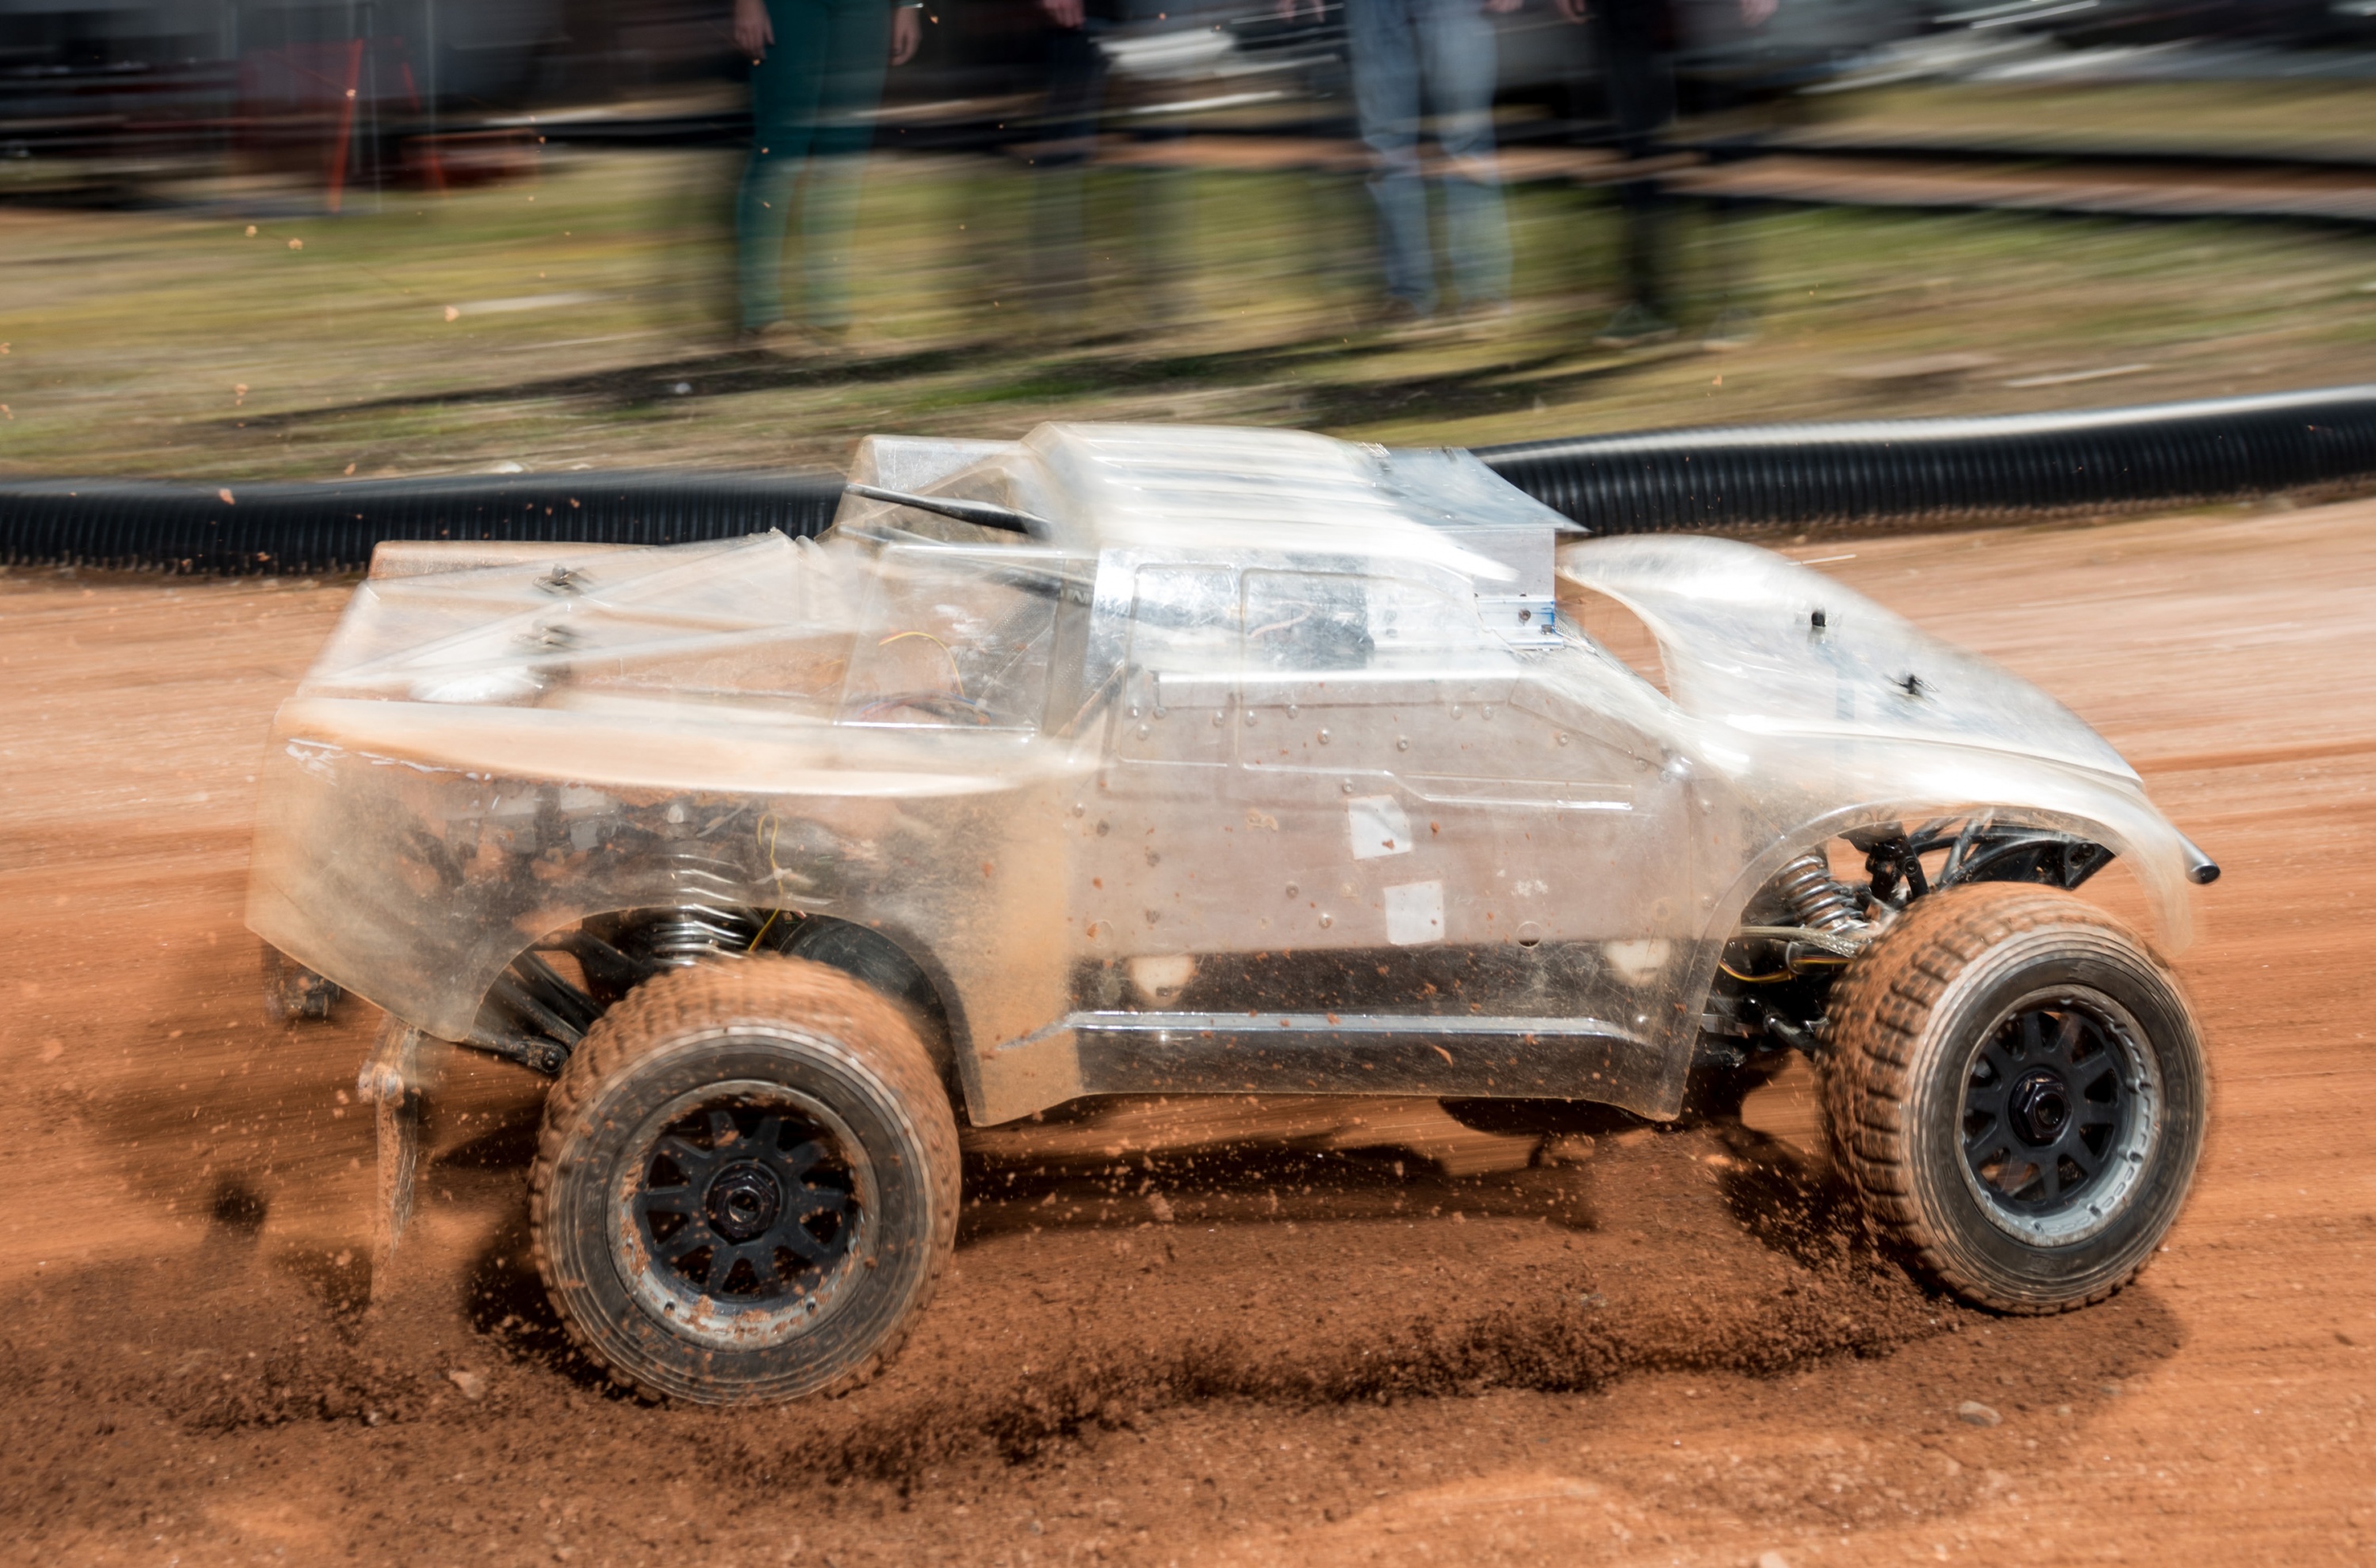 At the Georgia Tech Autonomous Racing Facility, researchers are studying a one-fifth-scale autonomous vehicle as it traverses a dirt track. The work will help the engineers understand how to help driverless vehicles face the risky and unusual road conditions of the real world. (Credit: Rob Felt, Georgia Tech)